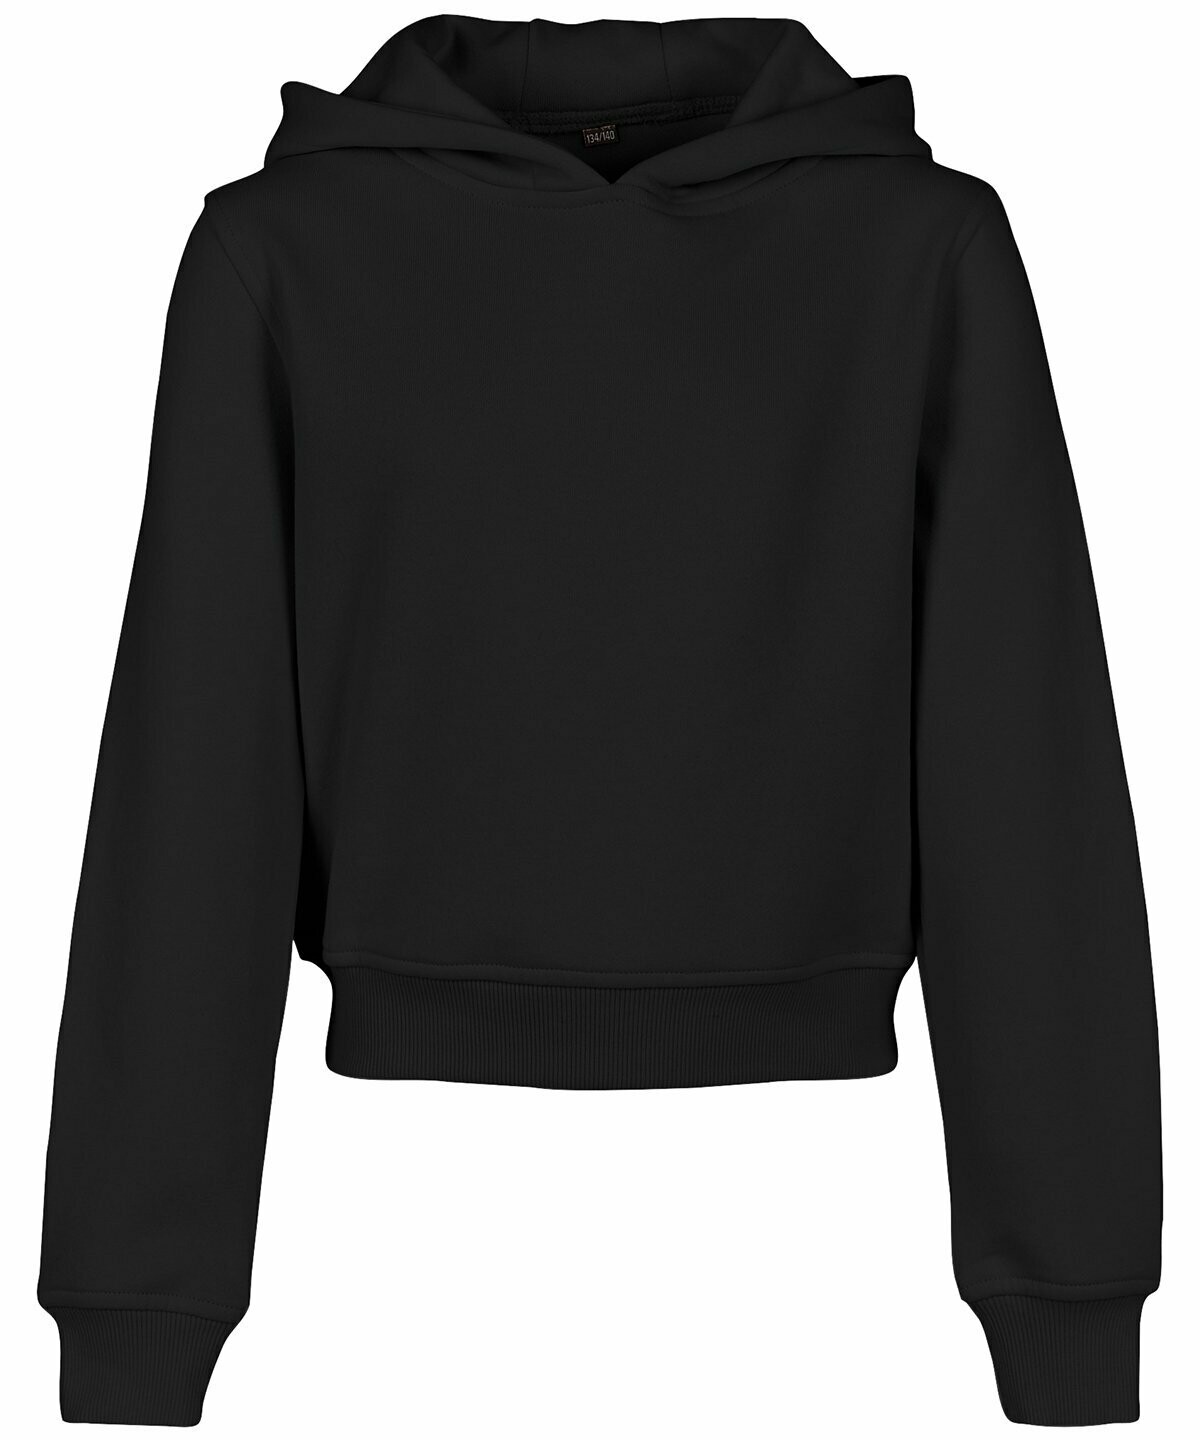 Determined To Succeed Design Kids Cropped Hoodie